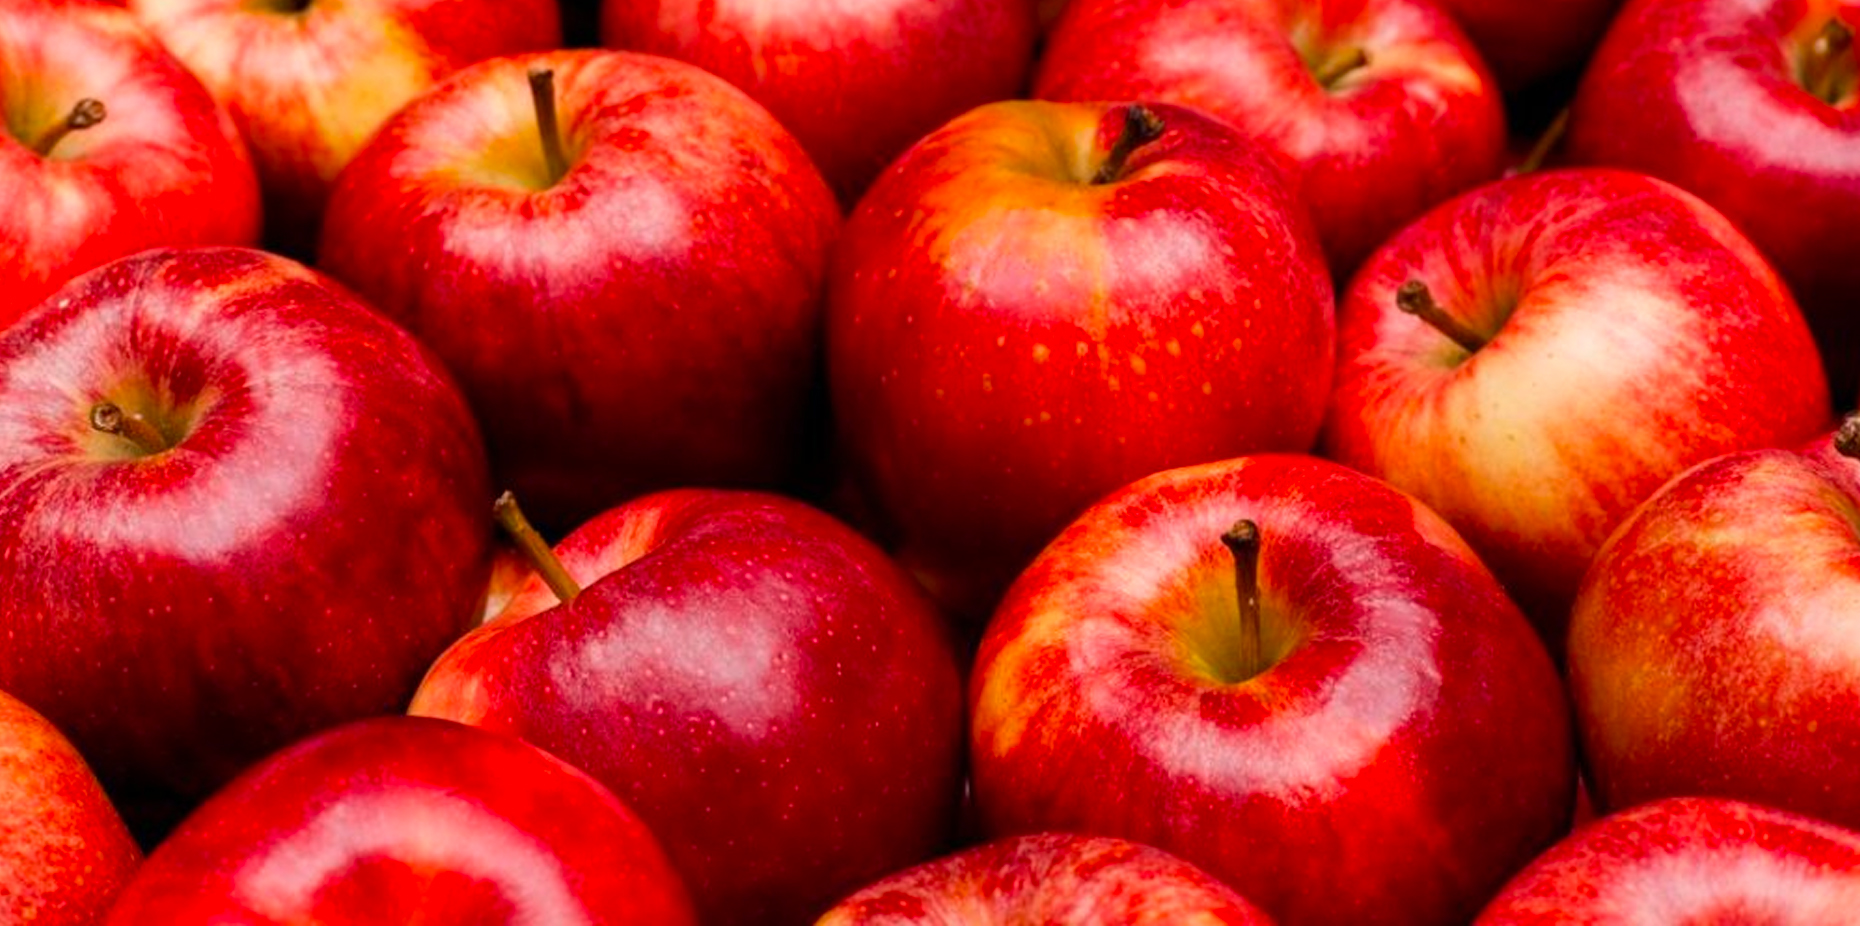 Apple: Facts, Nutrition, Benefits, and More